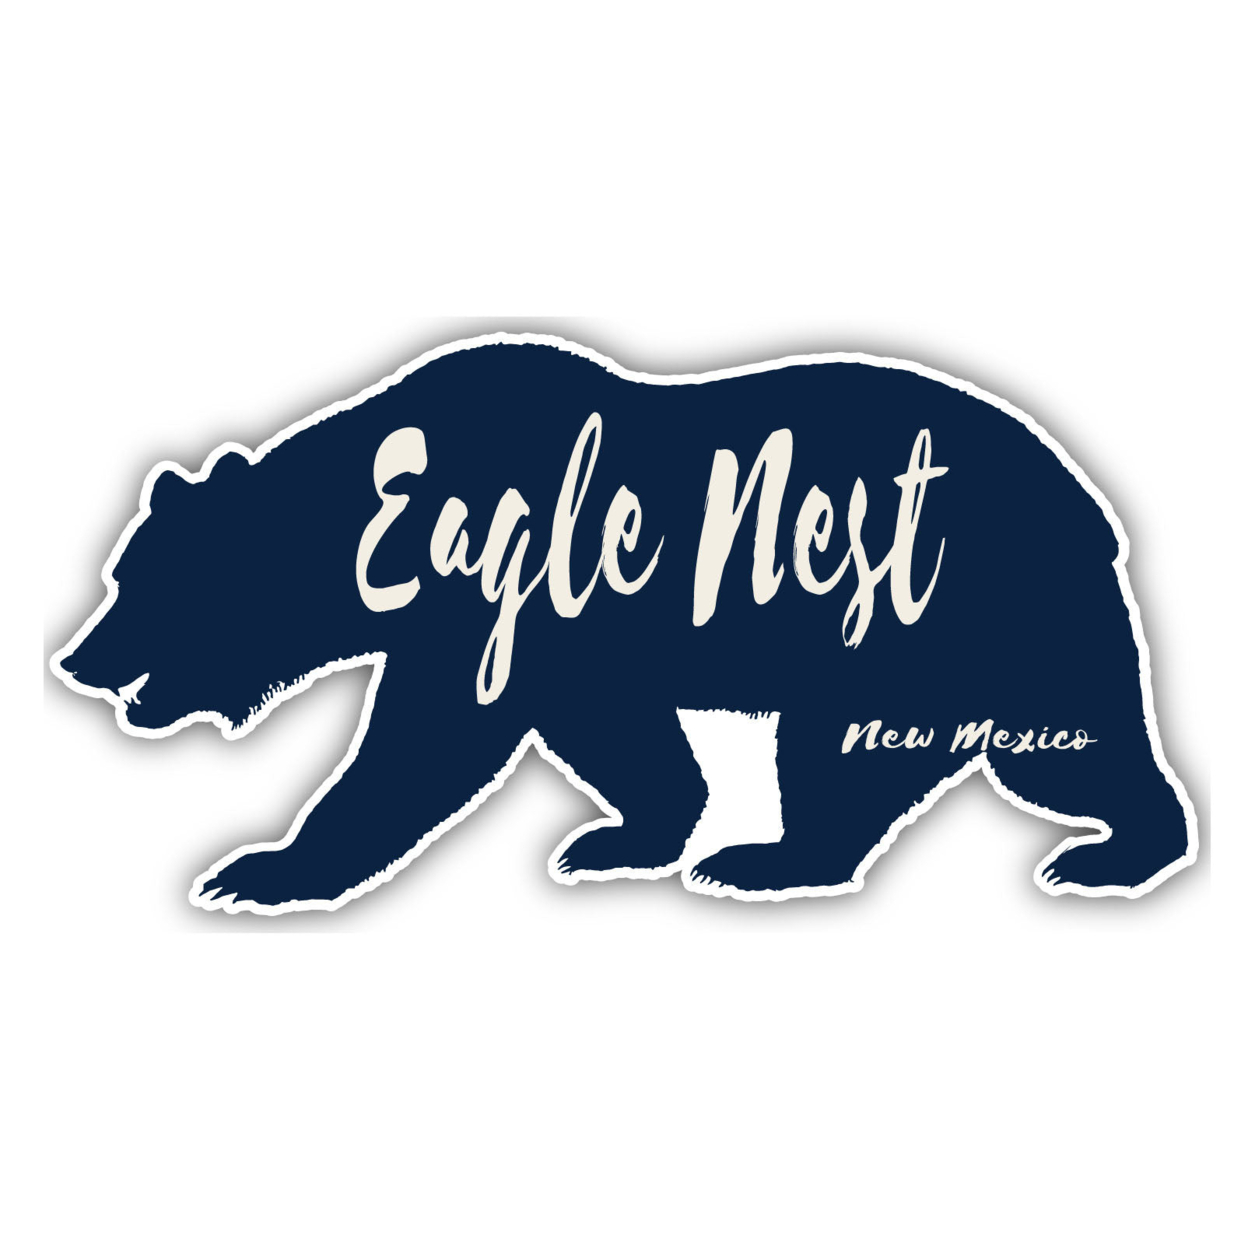 Eagle Nest New Mexico Souvenir Decorative Stickers (Choose Theme And Size) - 4-Pack, 6-Inch, Great Outdoors